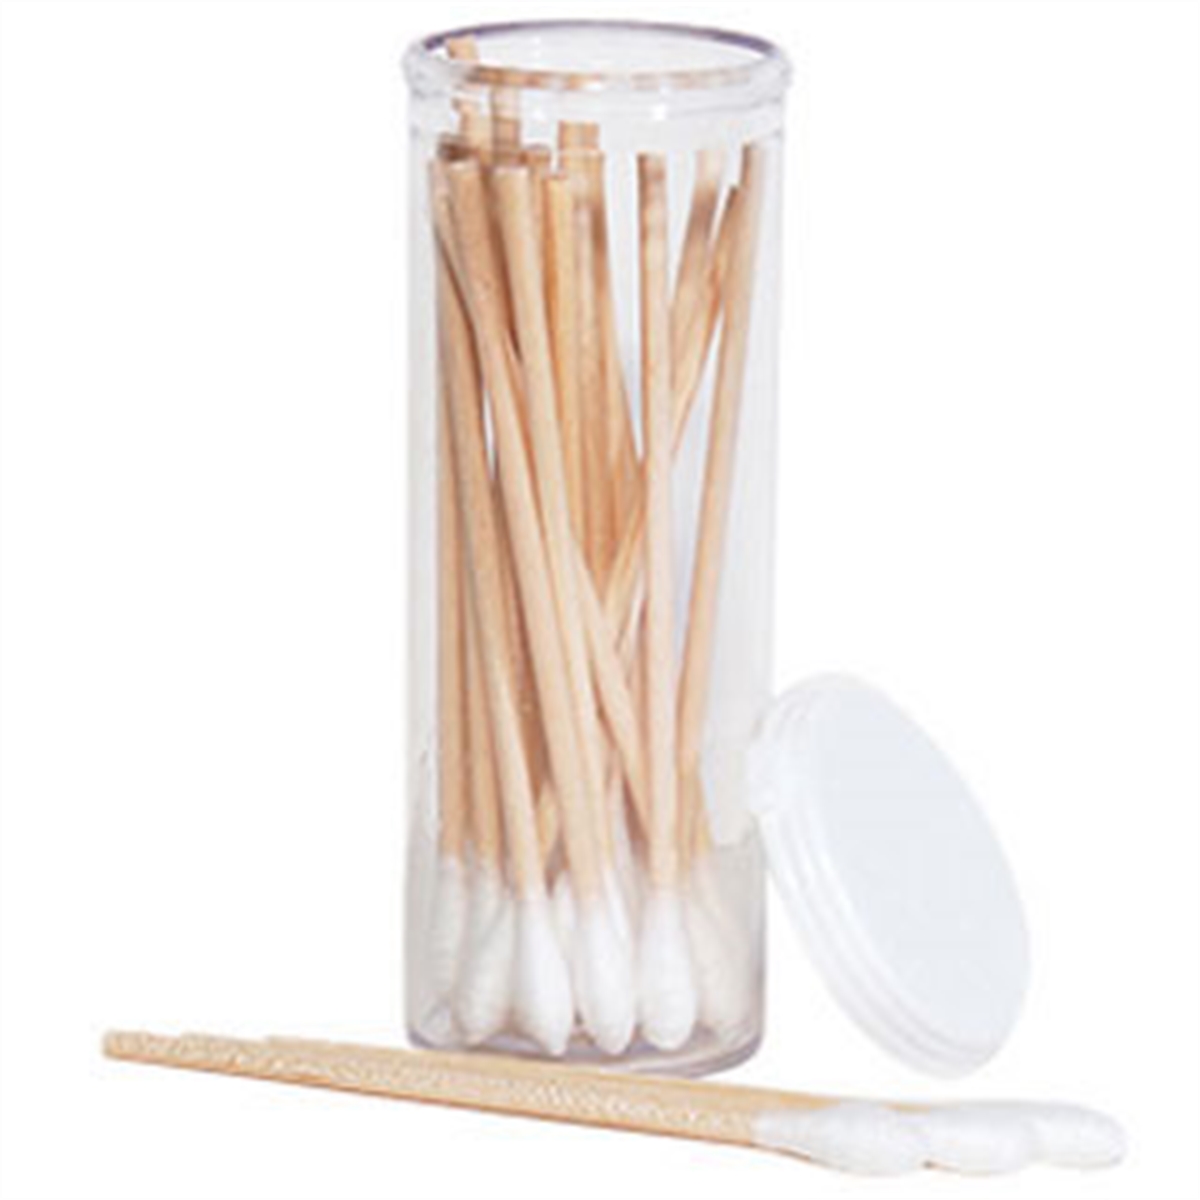 Picture of Chaos Safety Supplies CSU1159 Non-Sterile Wood Stick Single-Tip Cotton Applicators - 25 per Pack